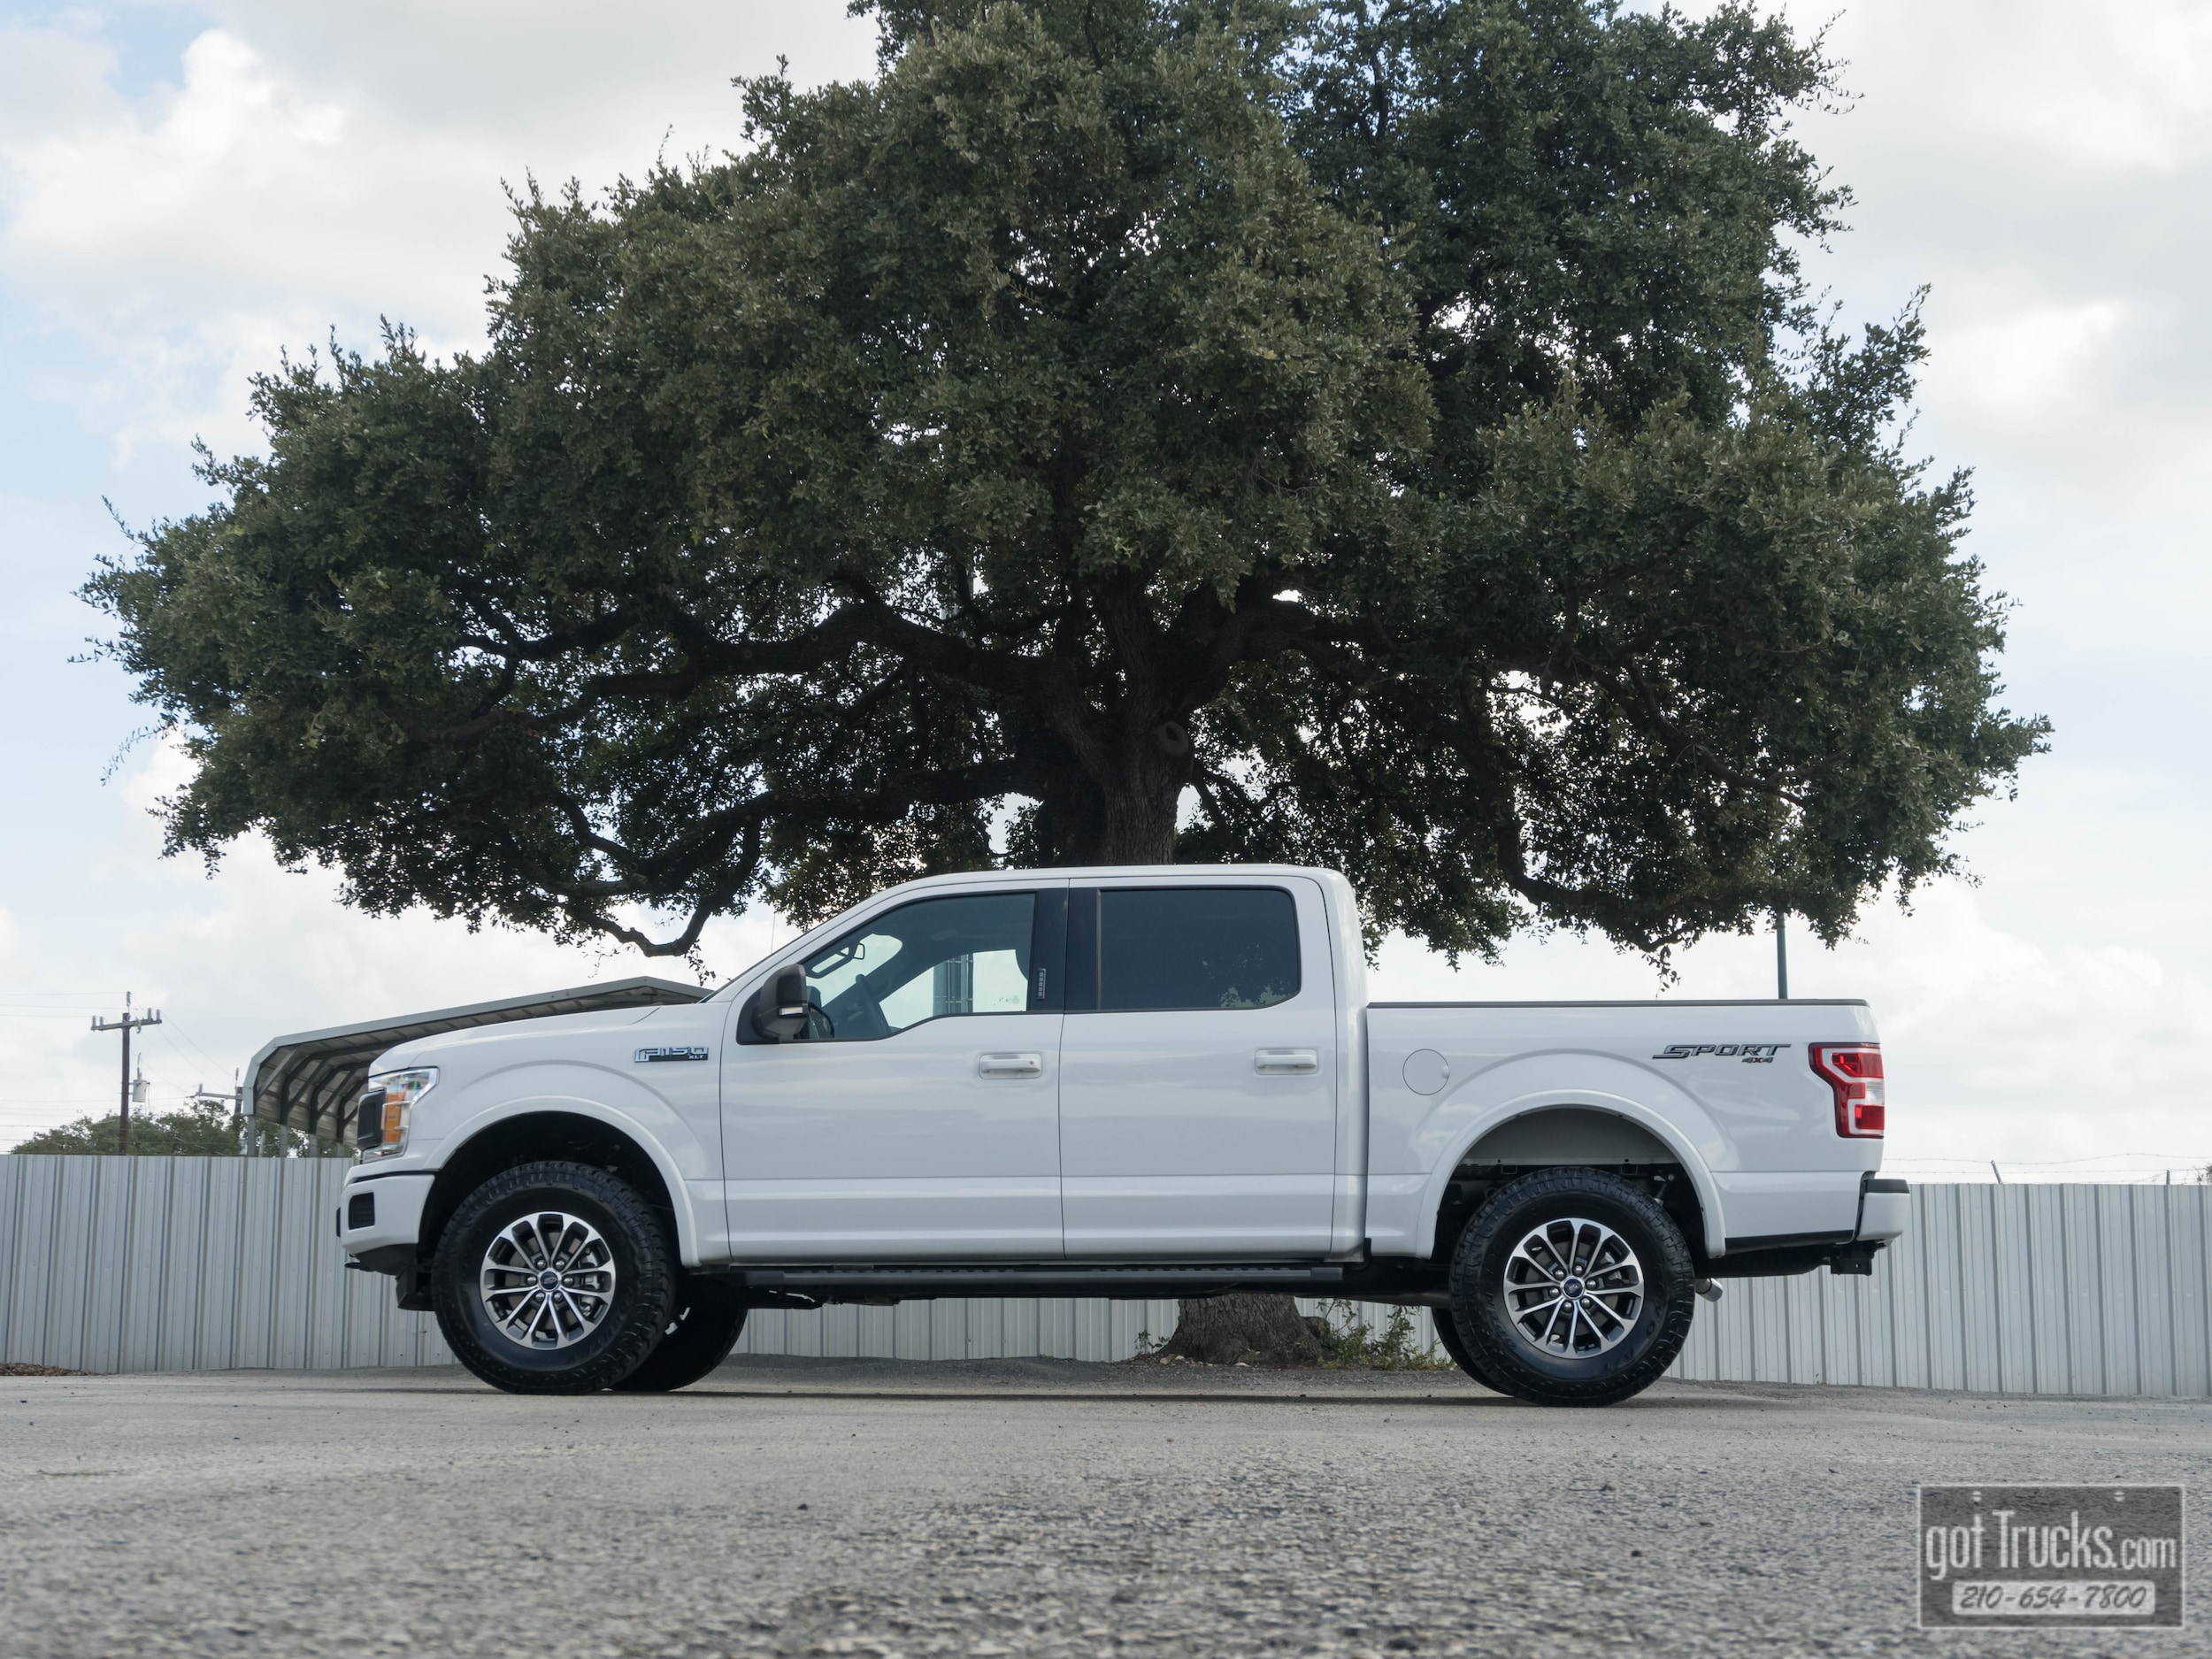 Ford F-150 Cars for sale in League City, TX | One-Stop ...